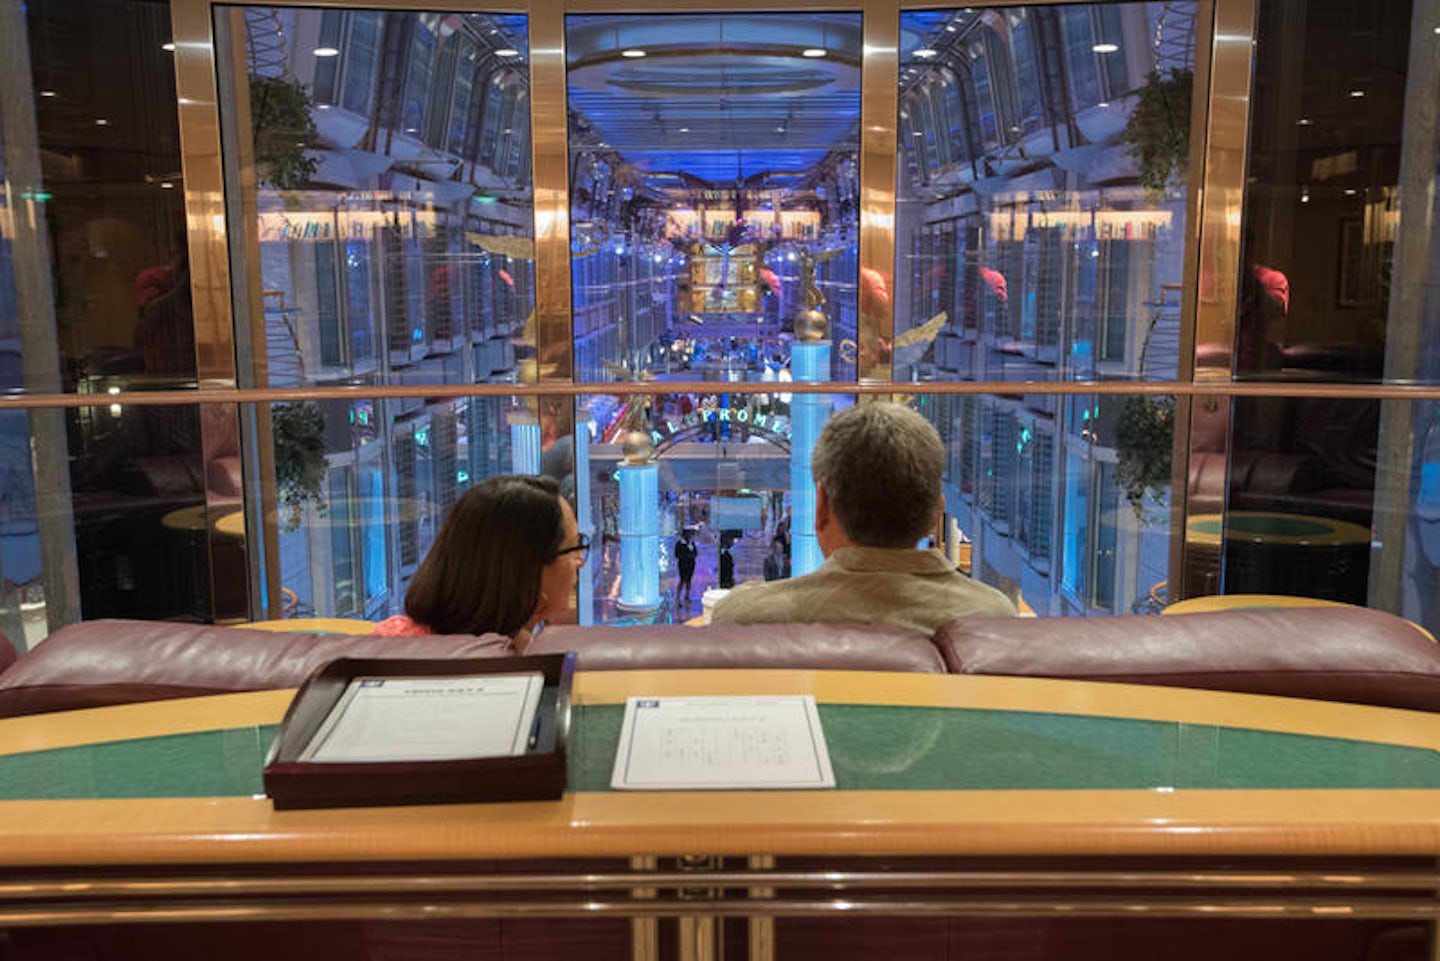 Library on Freedom of the Seas